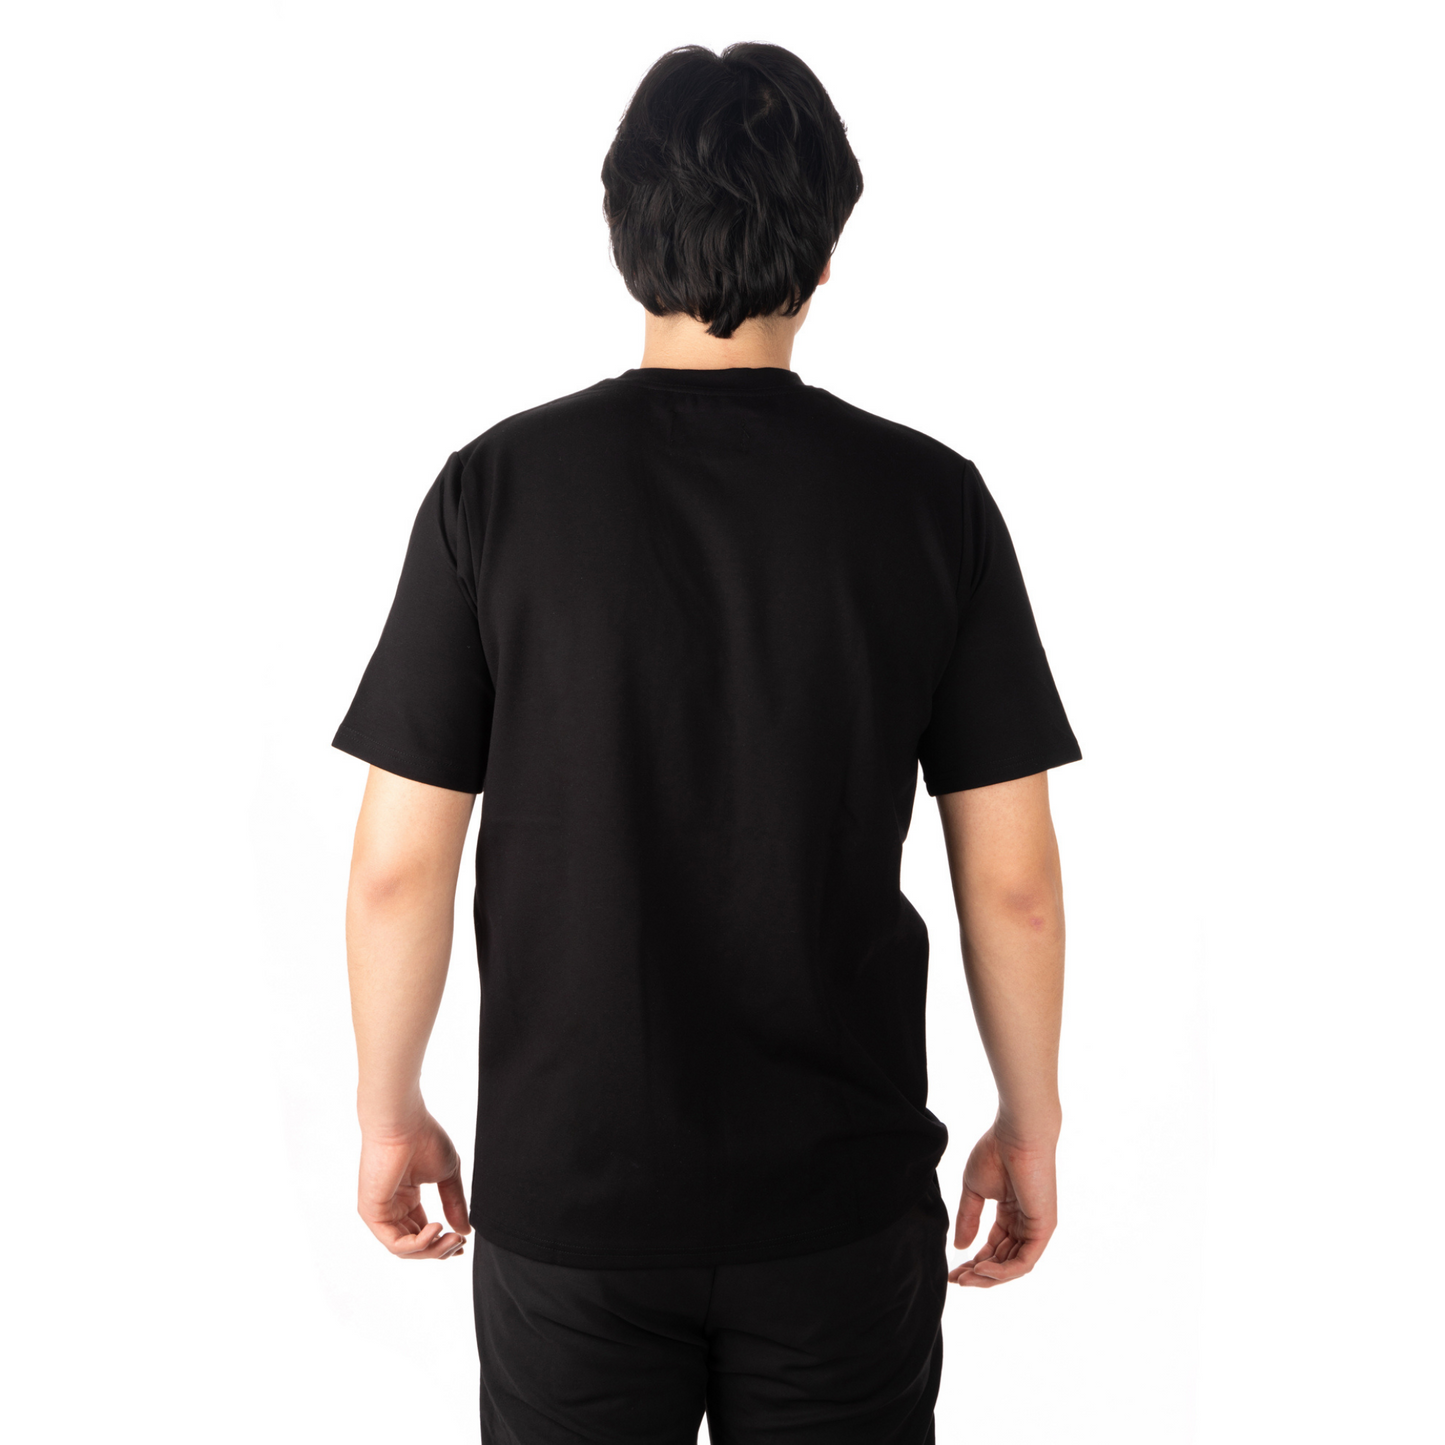 L’Homme Moderne Black T-shirt with Stainless Smiley back view on male model